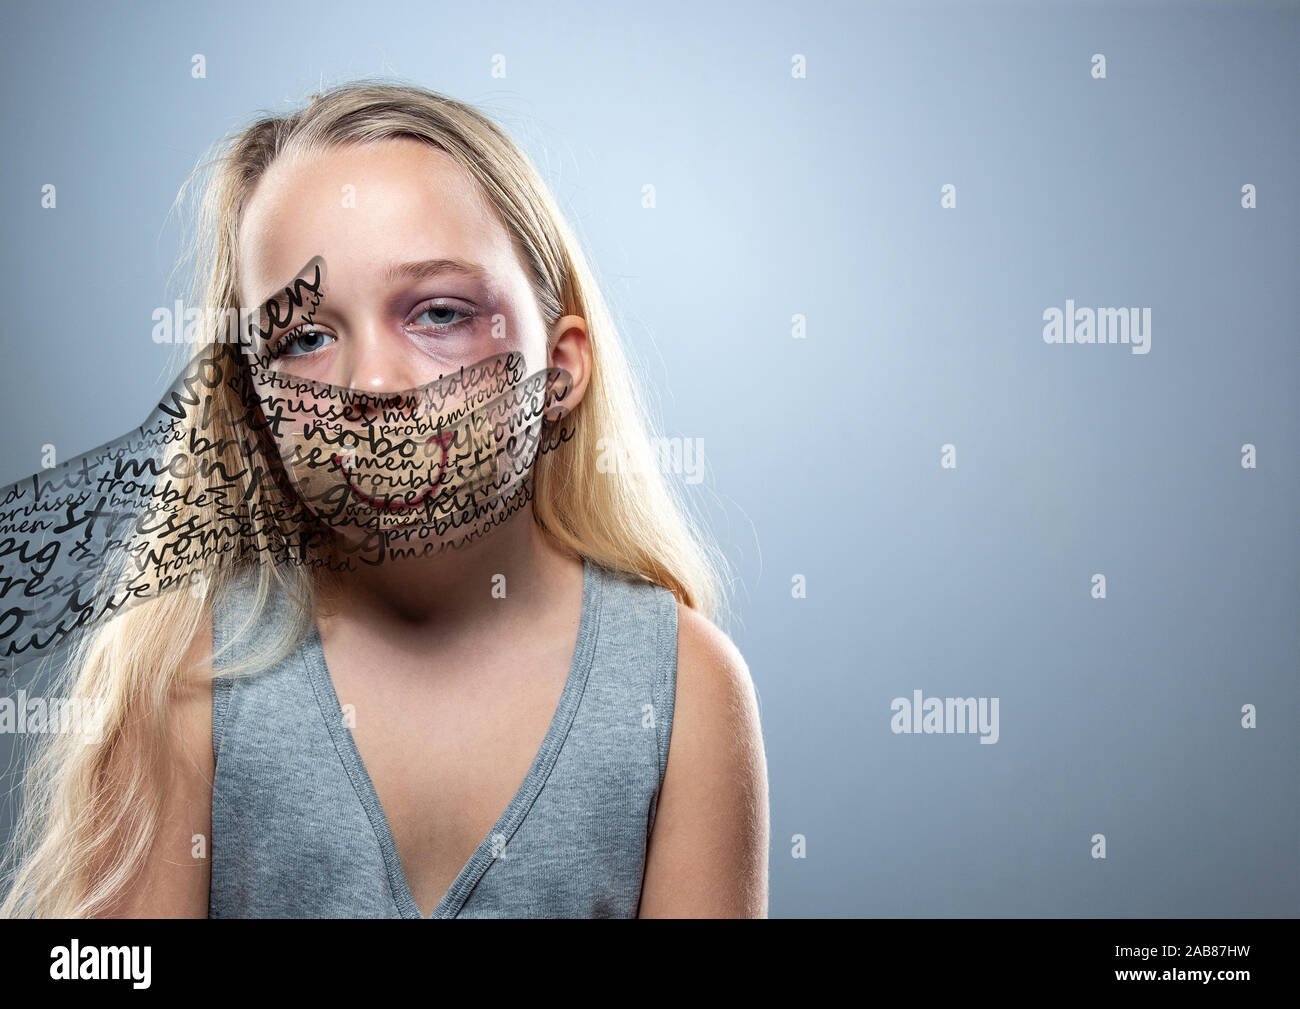 Tired. Sad little girl with bloodshot, bruised eyes and covered mouth. Concept of child violence, domestic abuse. Depressed being victim of parents. Illusion of childhood. Invisible male hand. Design. Stock Photo